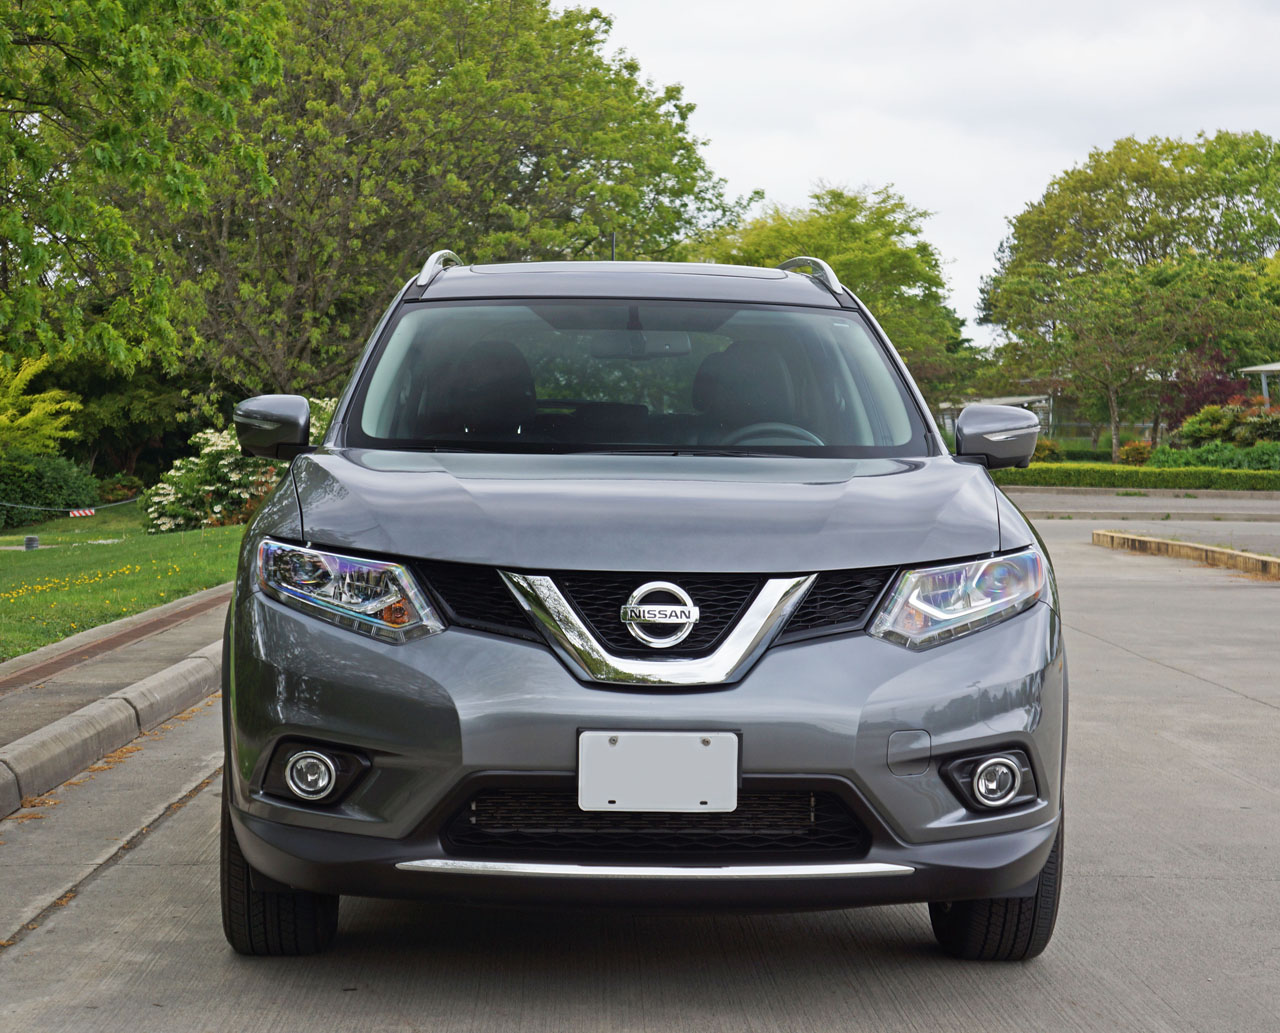 2015 Nissan Rogue SL AWD Road Test Review | The Car Magazine